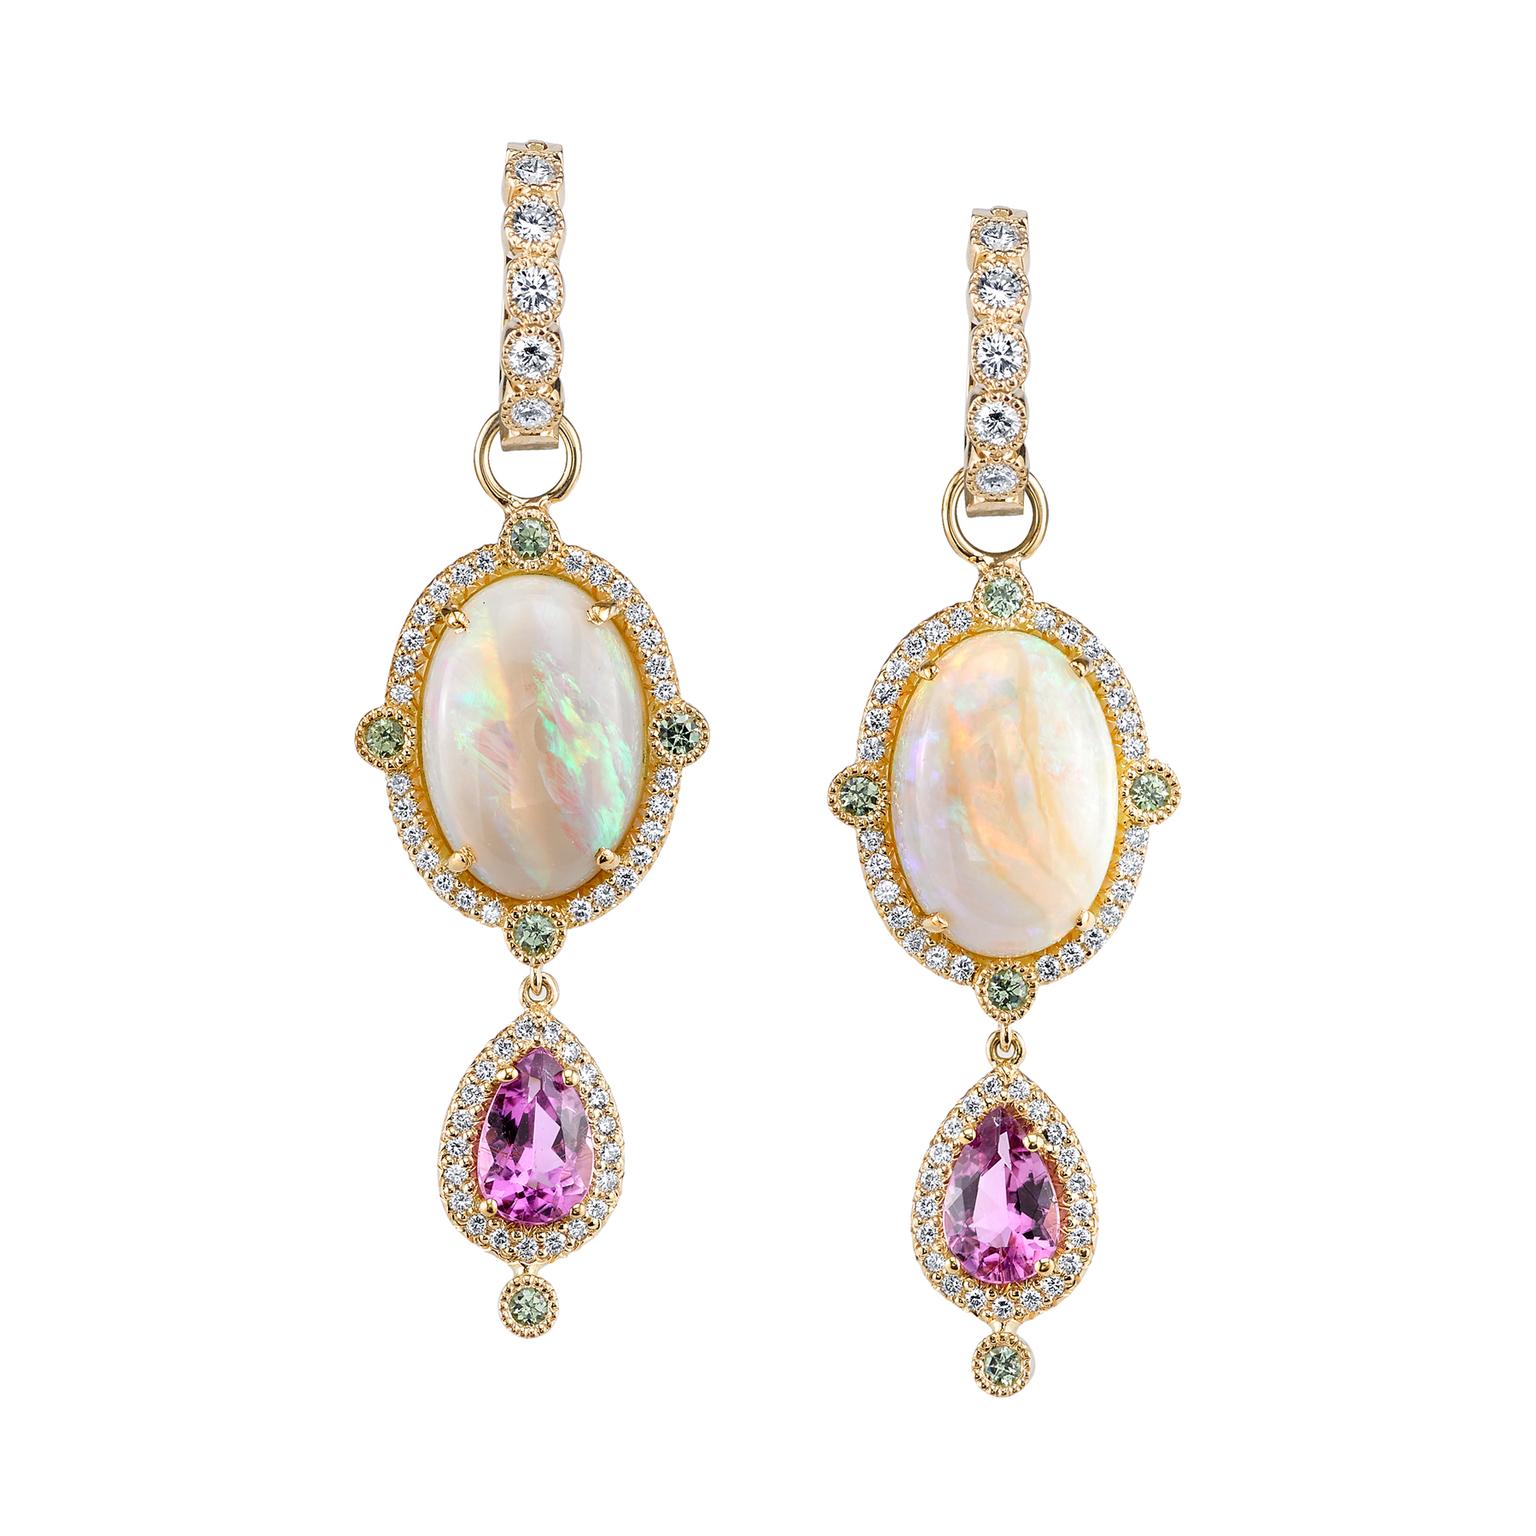 Erica Courtney's candy store of colored gems | The Jewellery Editor